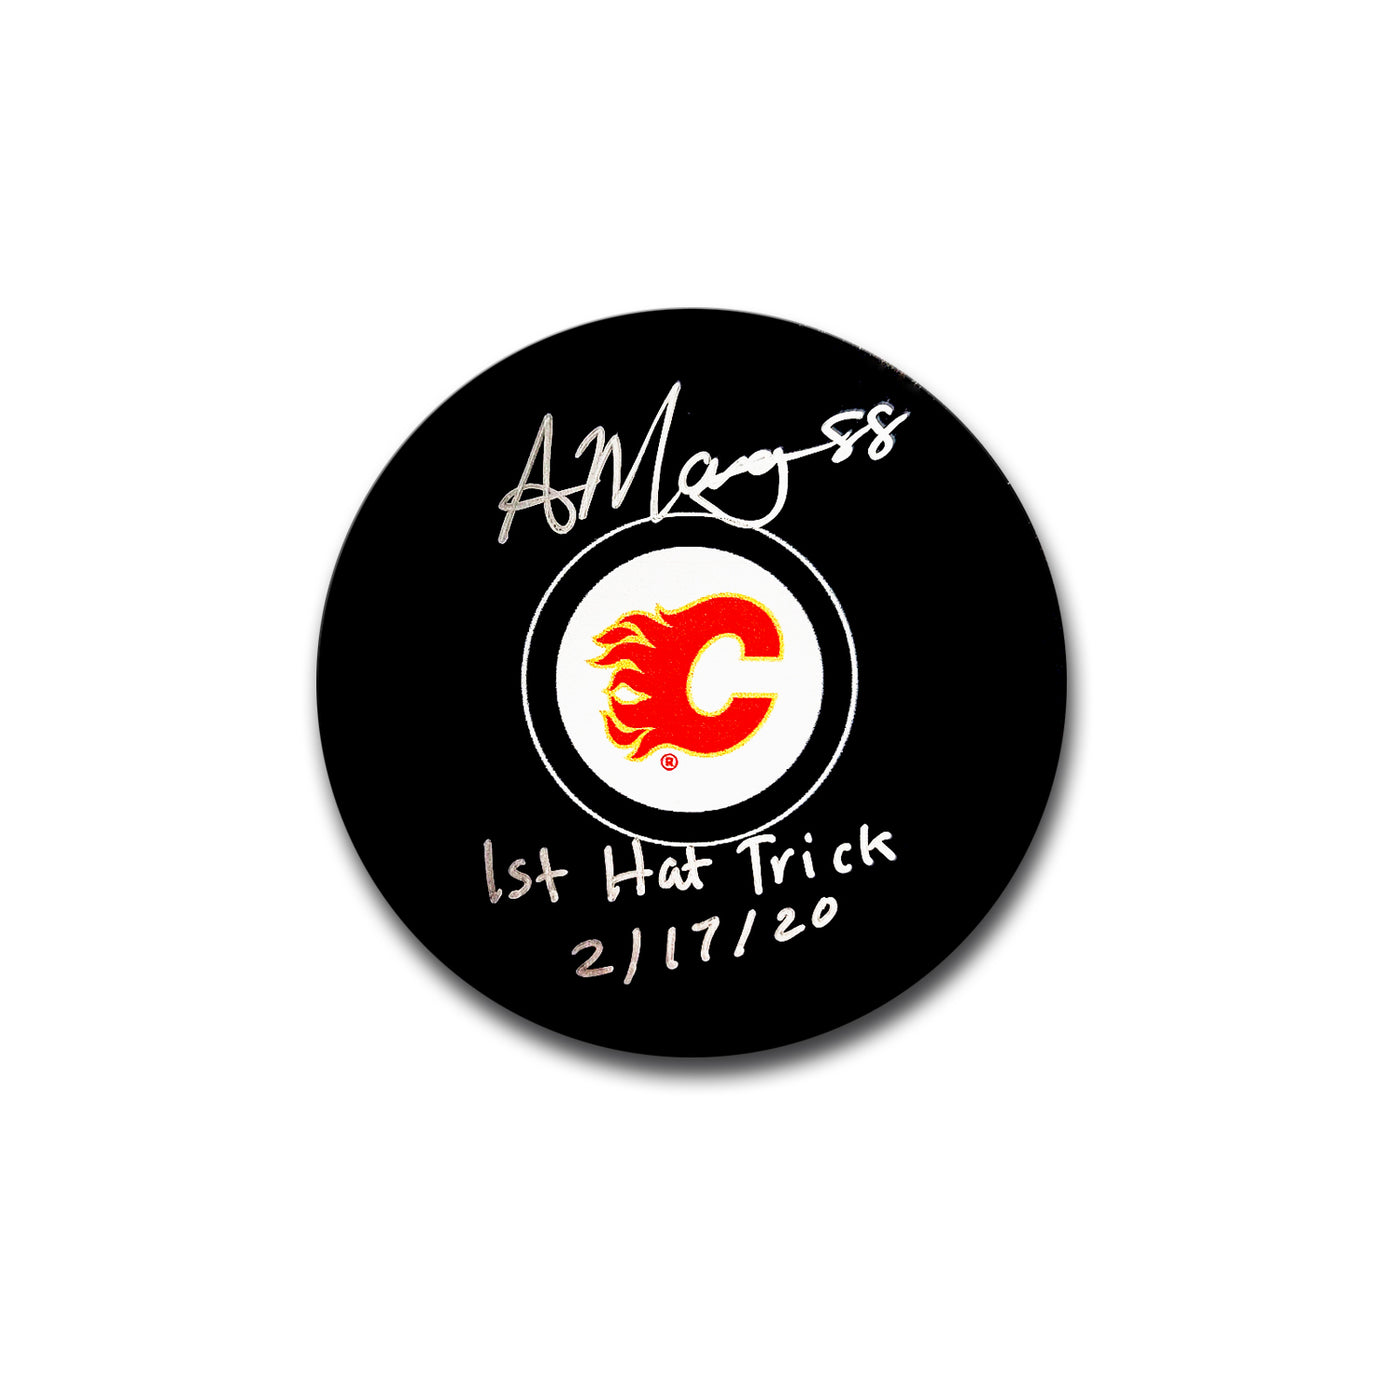 Andrew Mangiapane Calgary Flames Autographed Hockey Puck Inscribed 1st Hat Trick 2/17/20